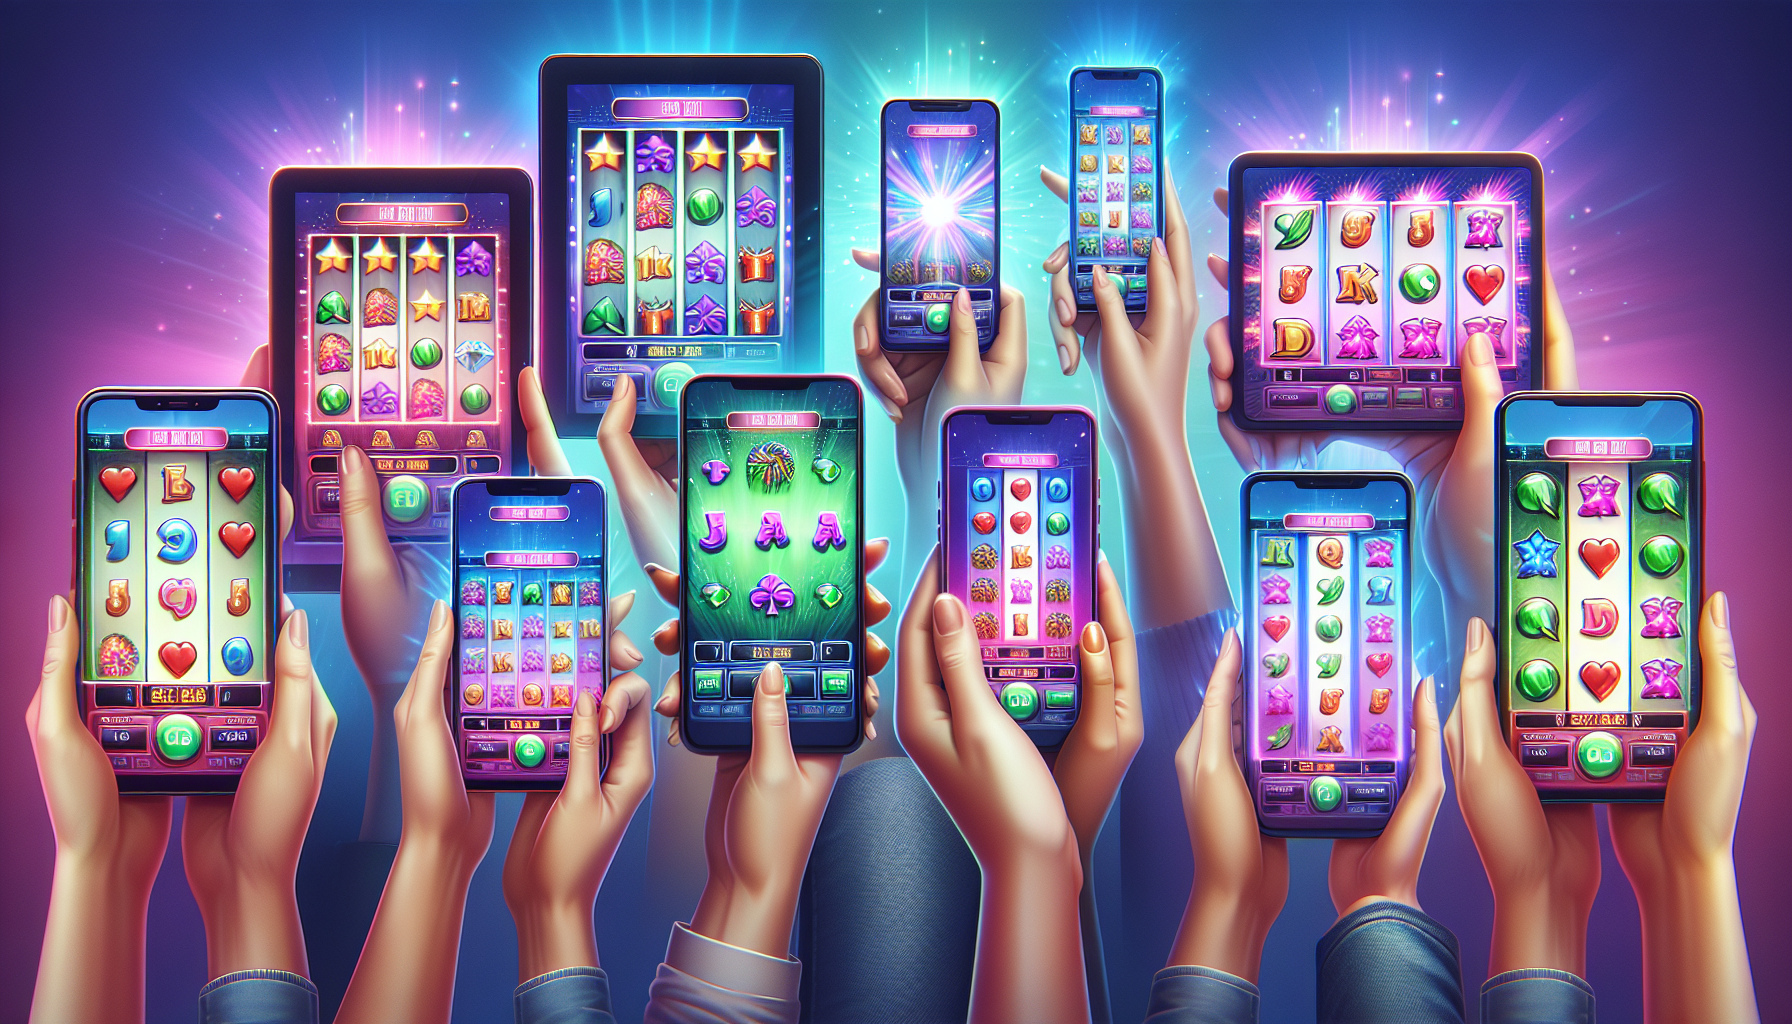 Illustration of seamless gaming on various mobile devices